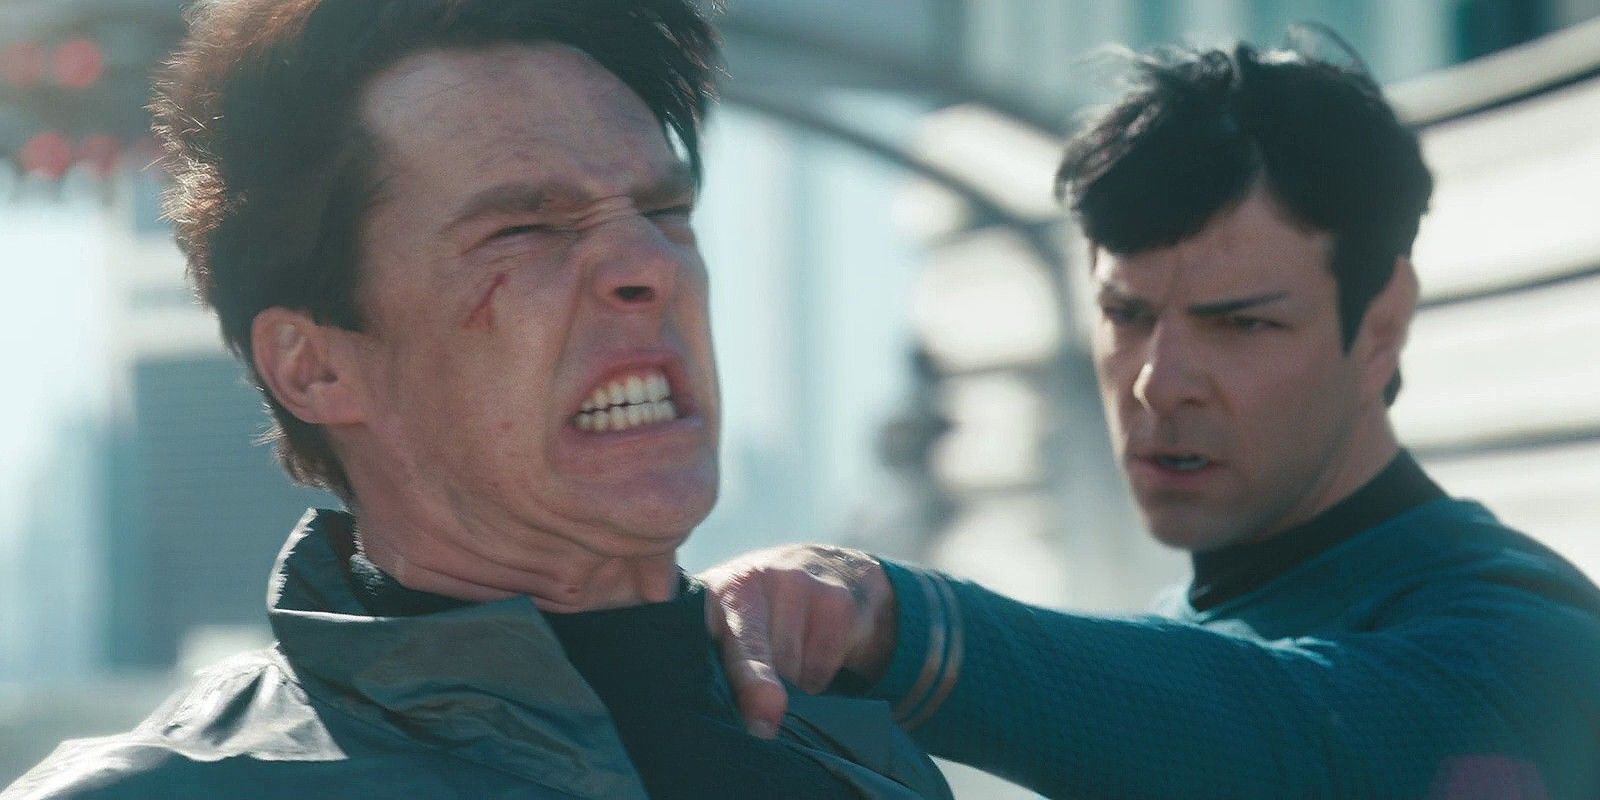 Benedict Cumberbatch as Khan and Zachary Quinto as Spock in Star Trek Into Darkness